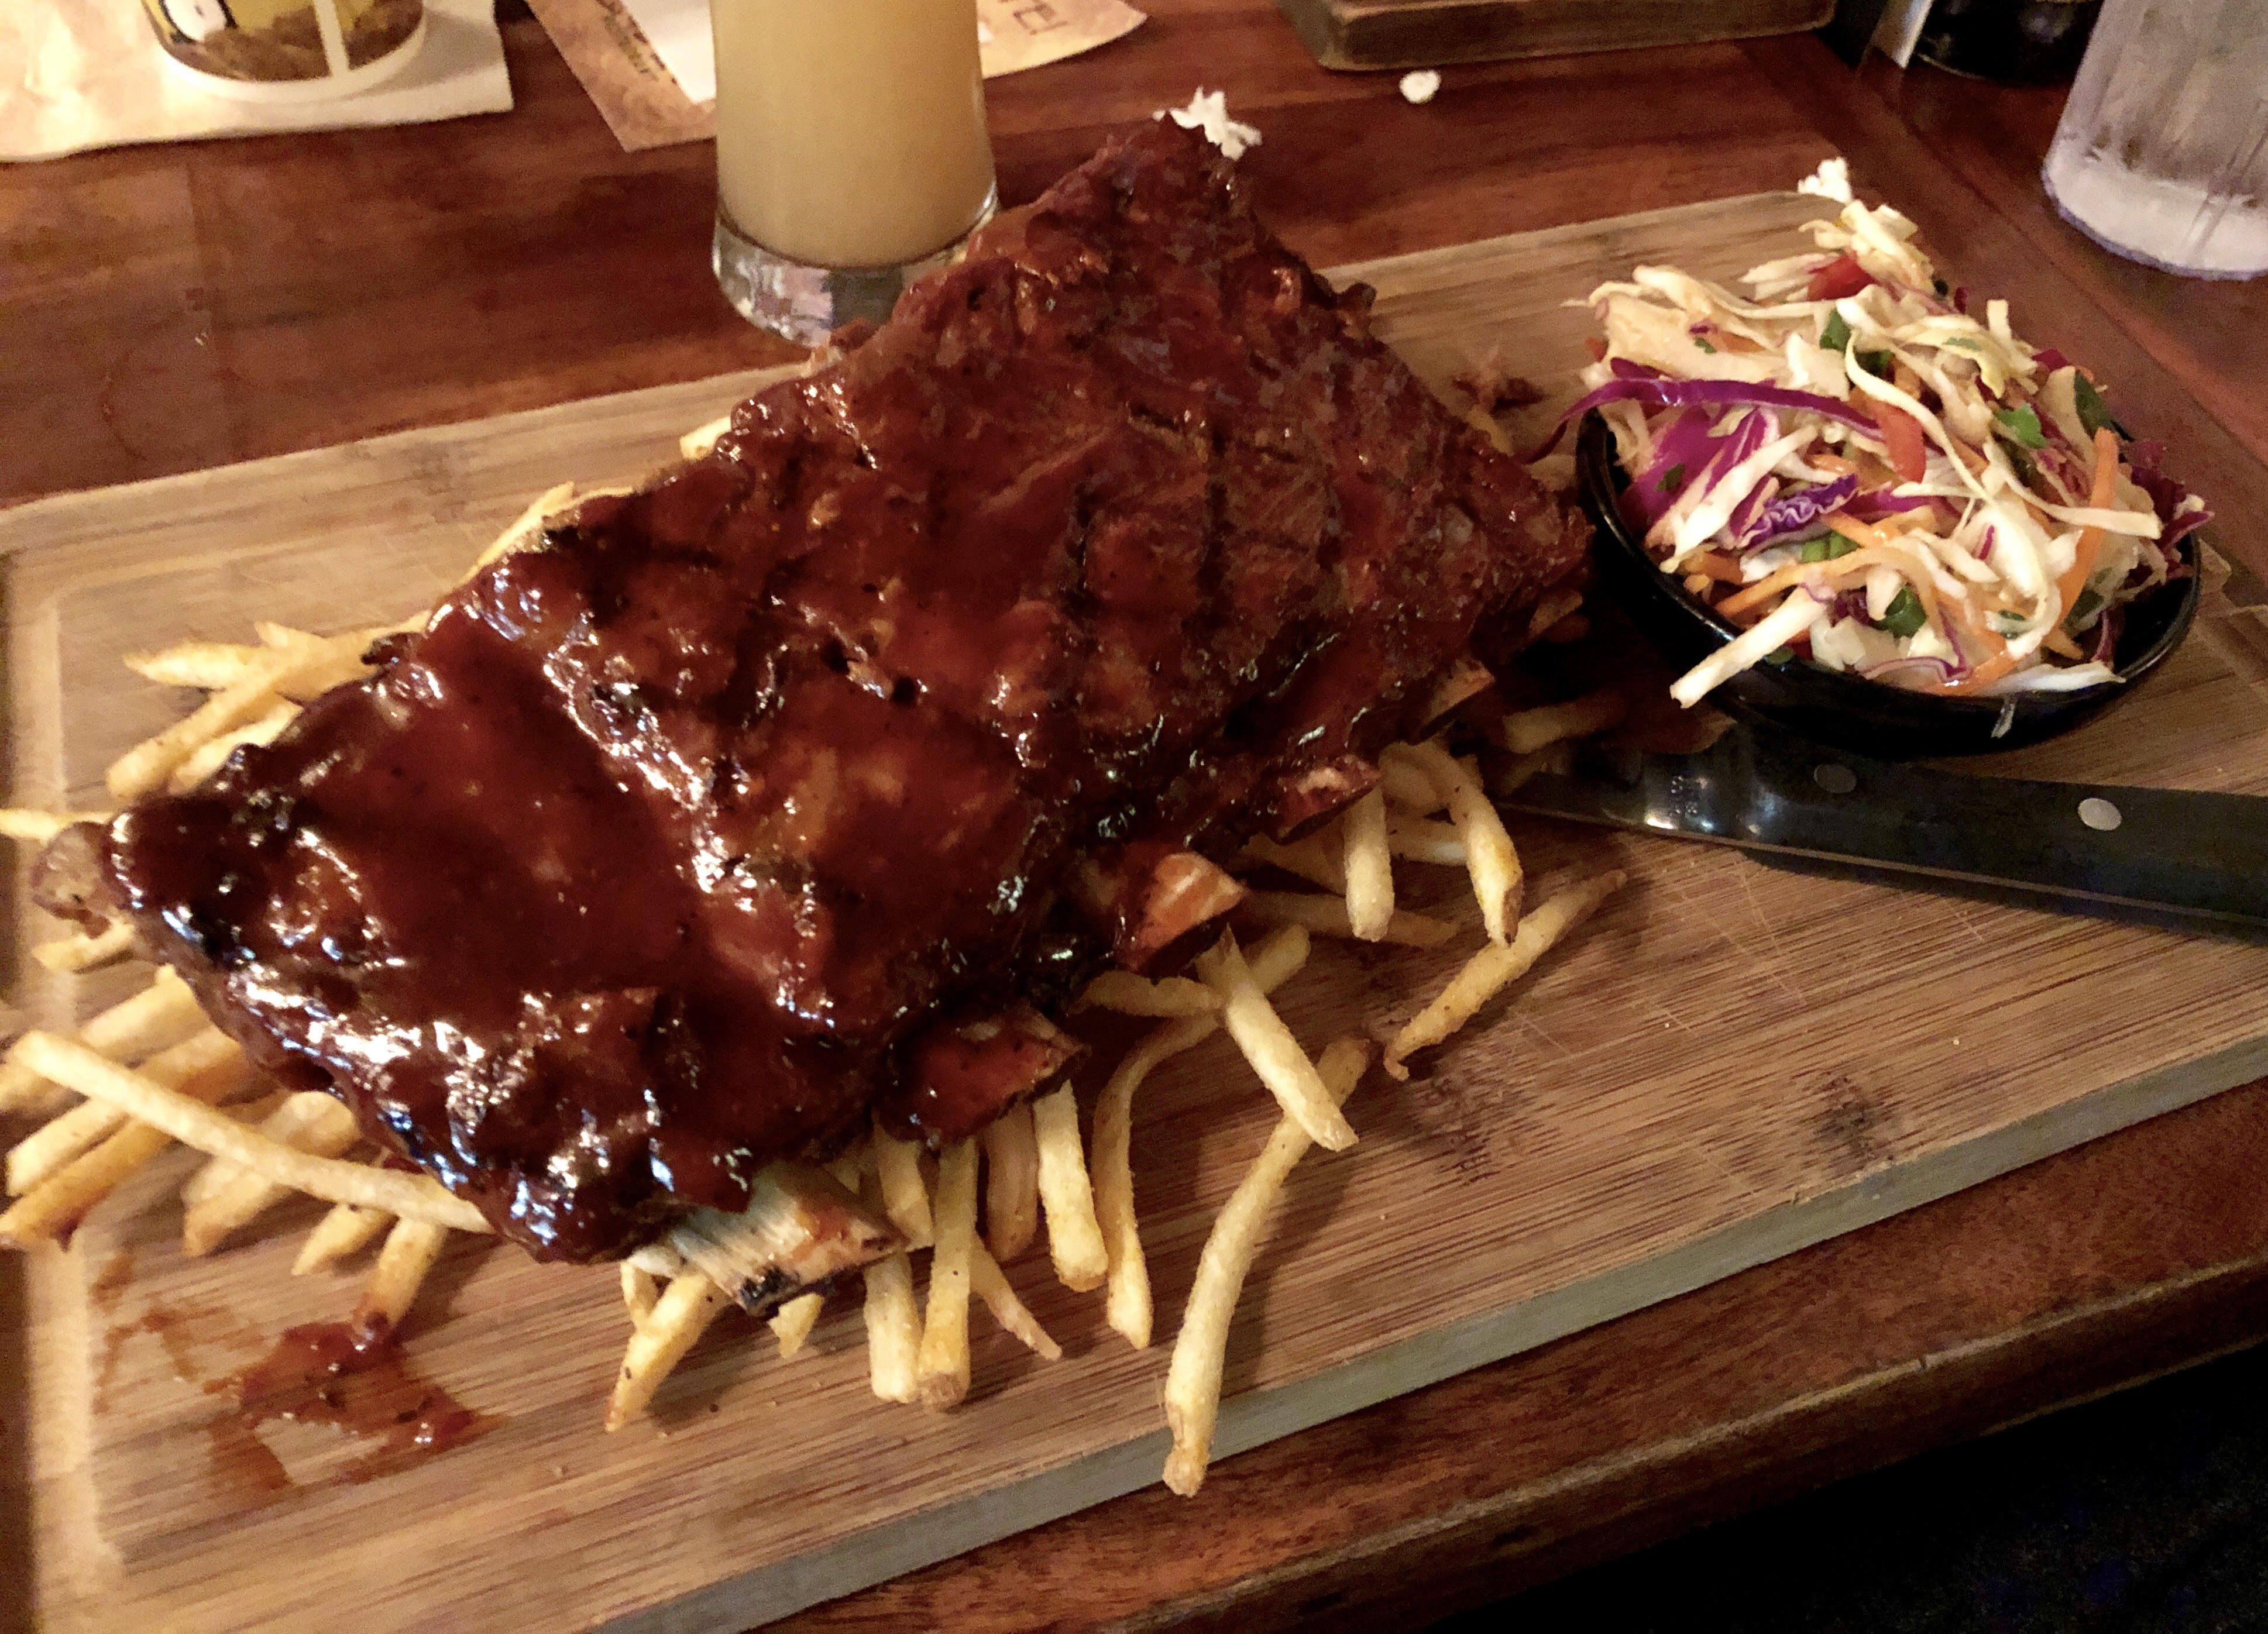 Check Out the Korean BBQ Ribs From Yak & Yeti